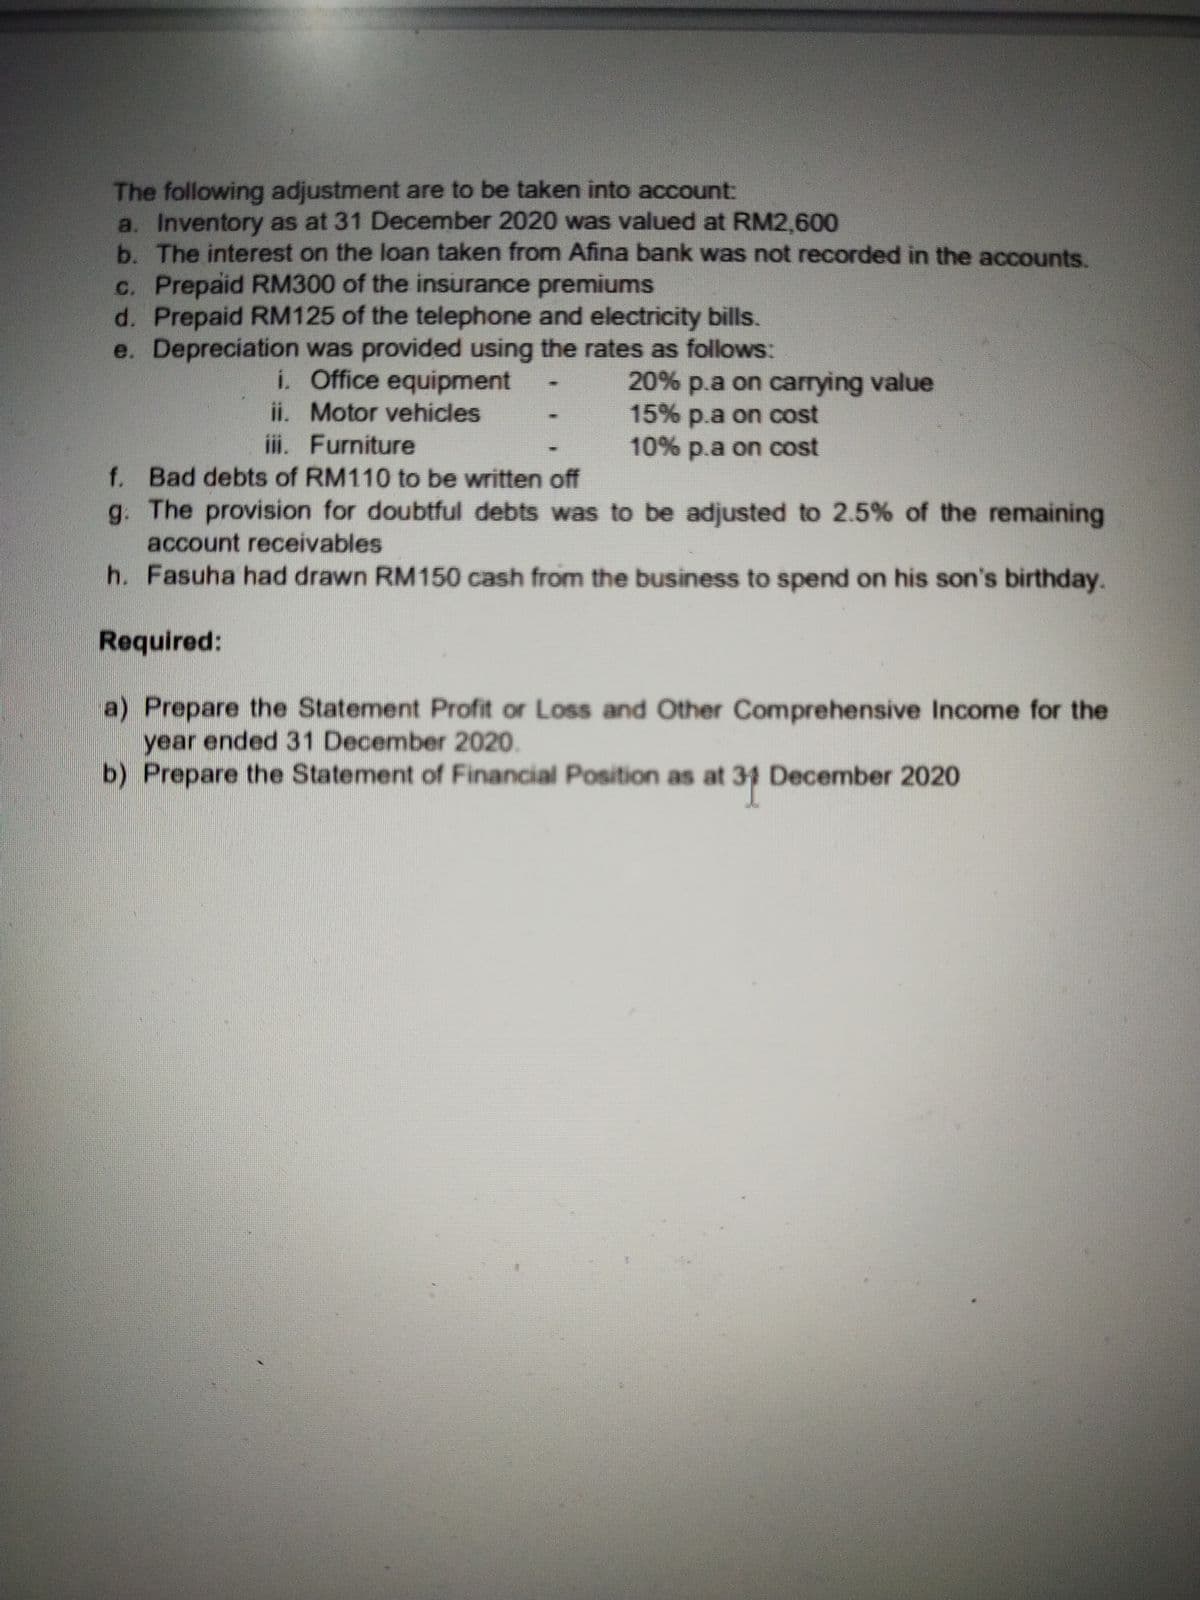 The following adjustment are to be taken into account:
a. Inventory as at 31 December 2020 was valued at RM2,600
b. The interest on the loan taken from Afina bank was not recorded in the accounts.
c. Prepaid RM300 of the insurance premiums
d. Prepaid RM125 of the telephone and electricity bills.
e. Depreciation was provided using the rates as follows:
i. Office equipment
ii. Motor vehicles
iii. Furniture
20% p.a on carrying value
15% p.a on cost
10% p.a on cost
f. Bad debts of RM110 to be written off
g. The provision for doubtful debts was to be adjusted to 2.5% of the remaining
account receivables
h. Fasuha had drawn RM150 cash from the business to spend on his son's birthday.
Required:
a) Prepare the Statement Profit or Loss and Other Comprehensive Income for the
year ended 31 December 2020.
b) Prepare the Statement of Financial Position as at 31 December 2020
